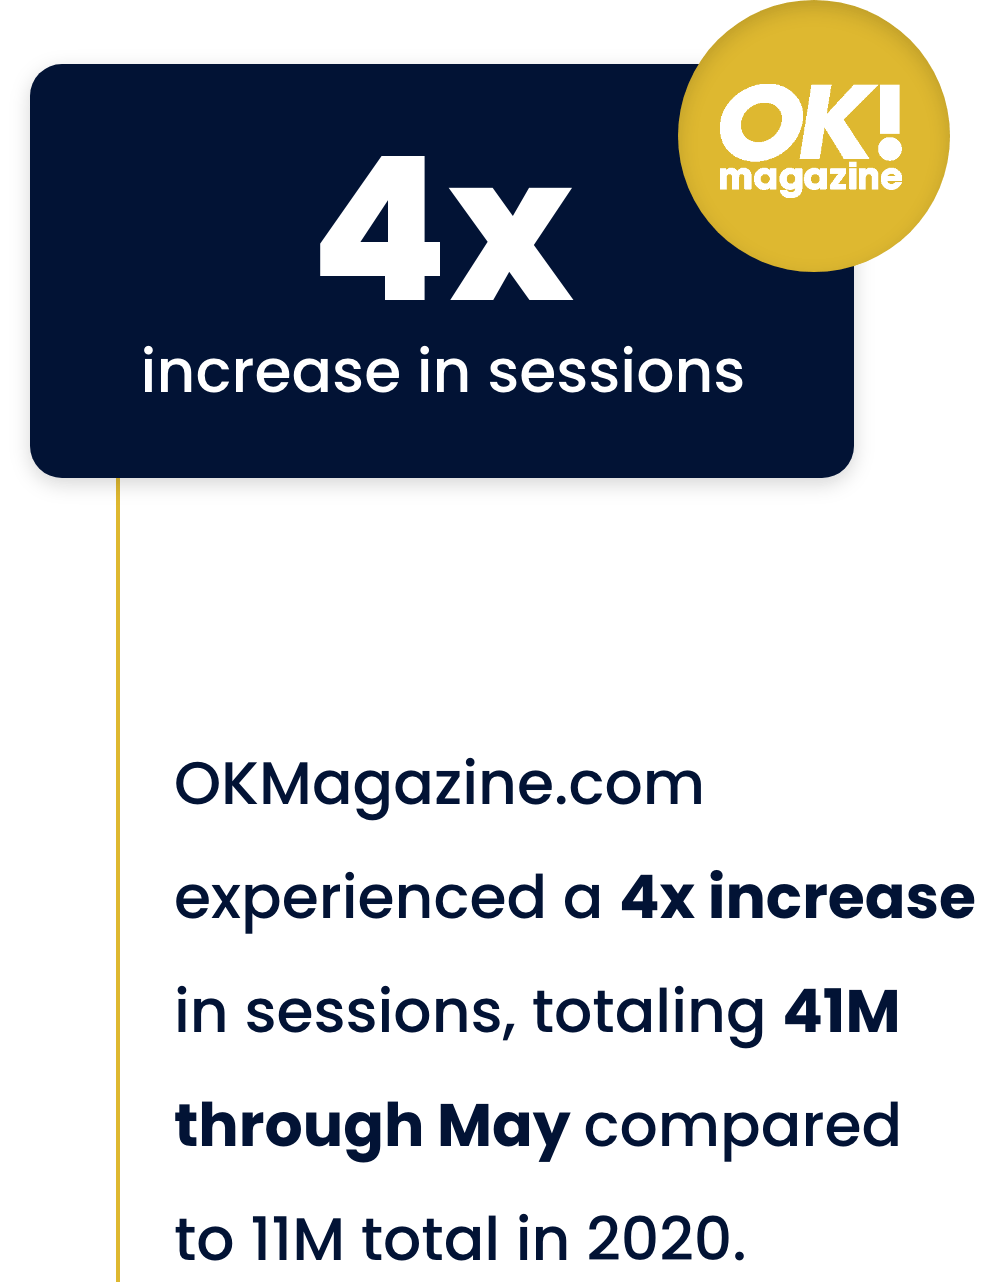 OKMagazine.com experienced a 4x increase in sessions, totaling 41M through May compared to 11M total in 2020.